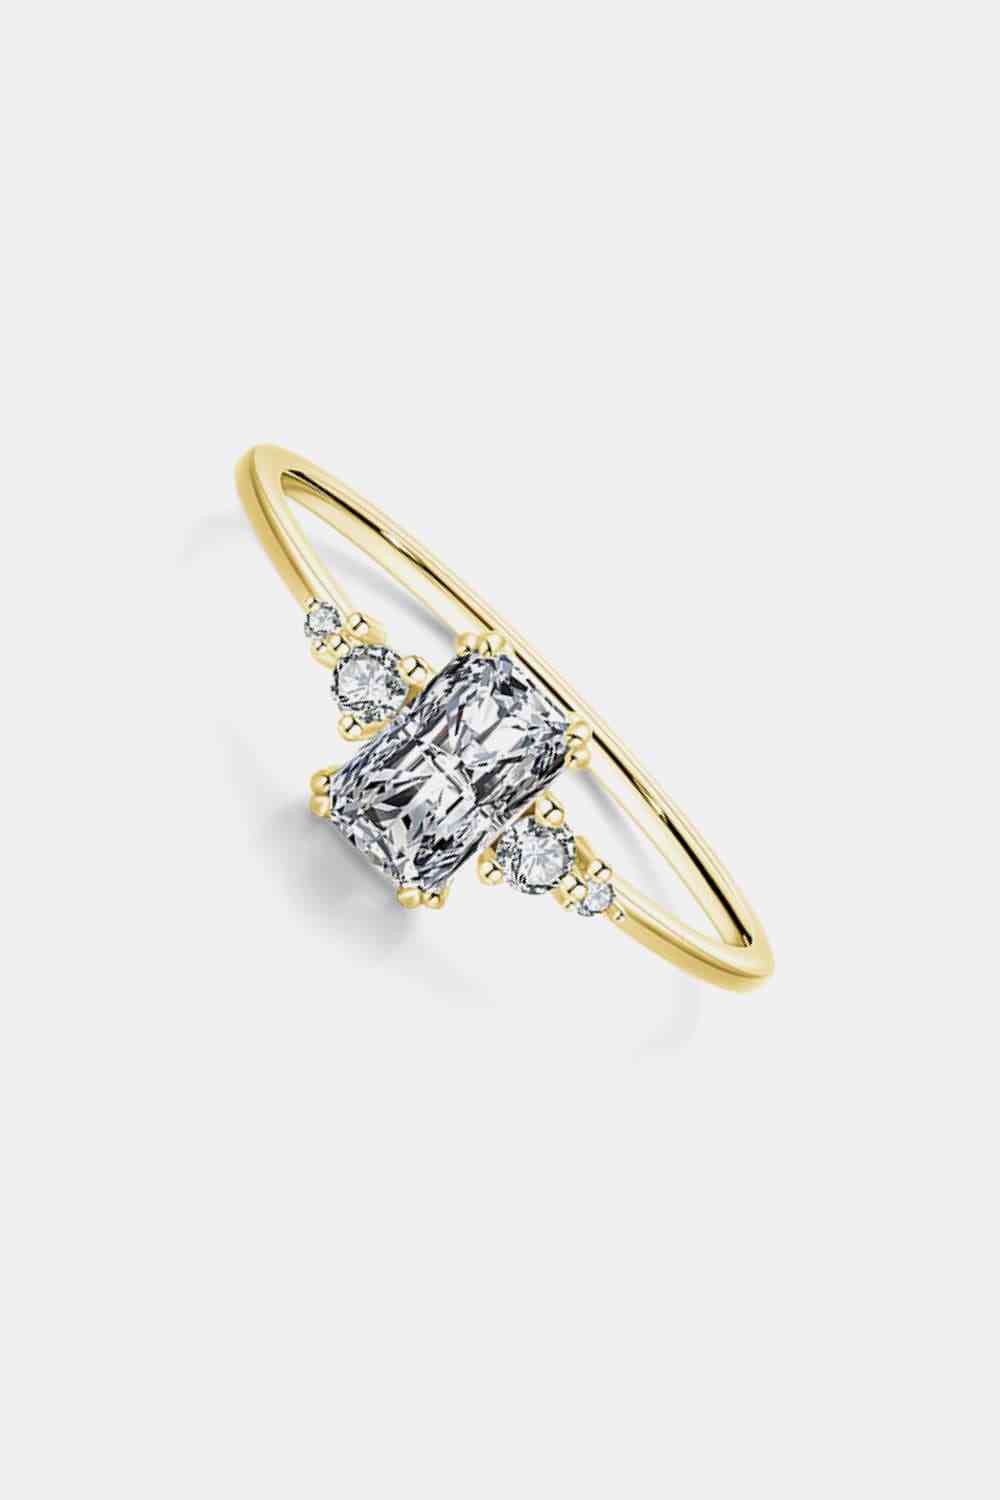 Radiant Cut White Zircon Ring Gold/Silver